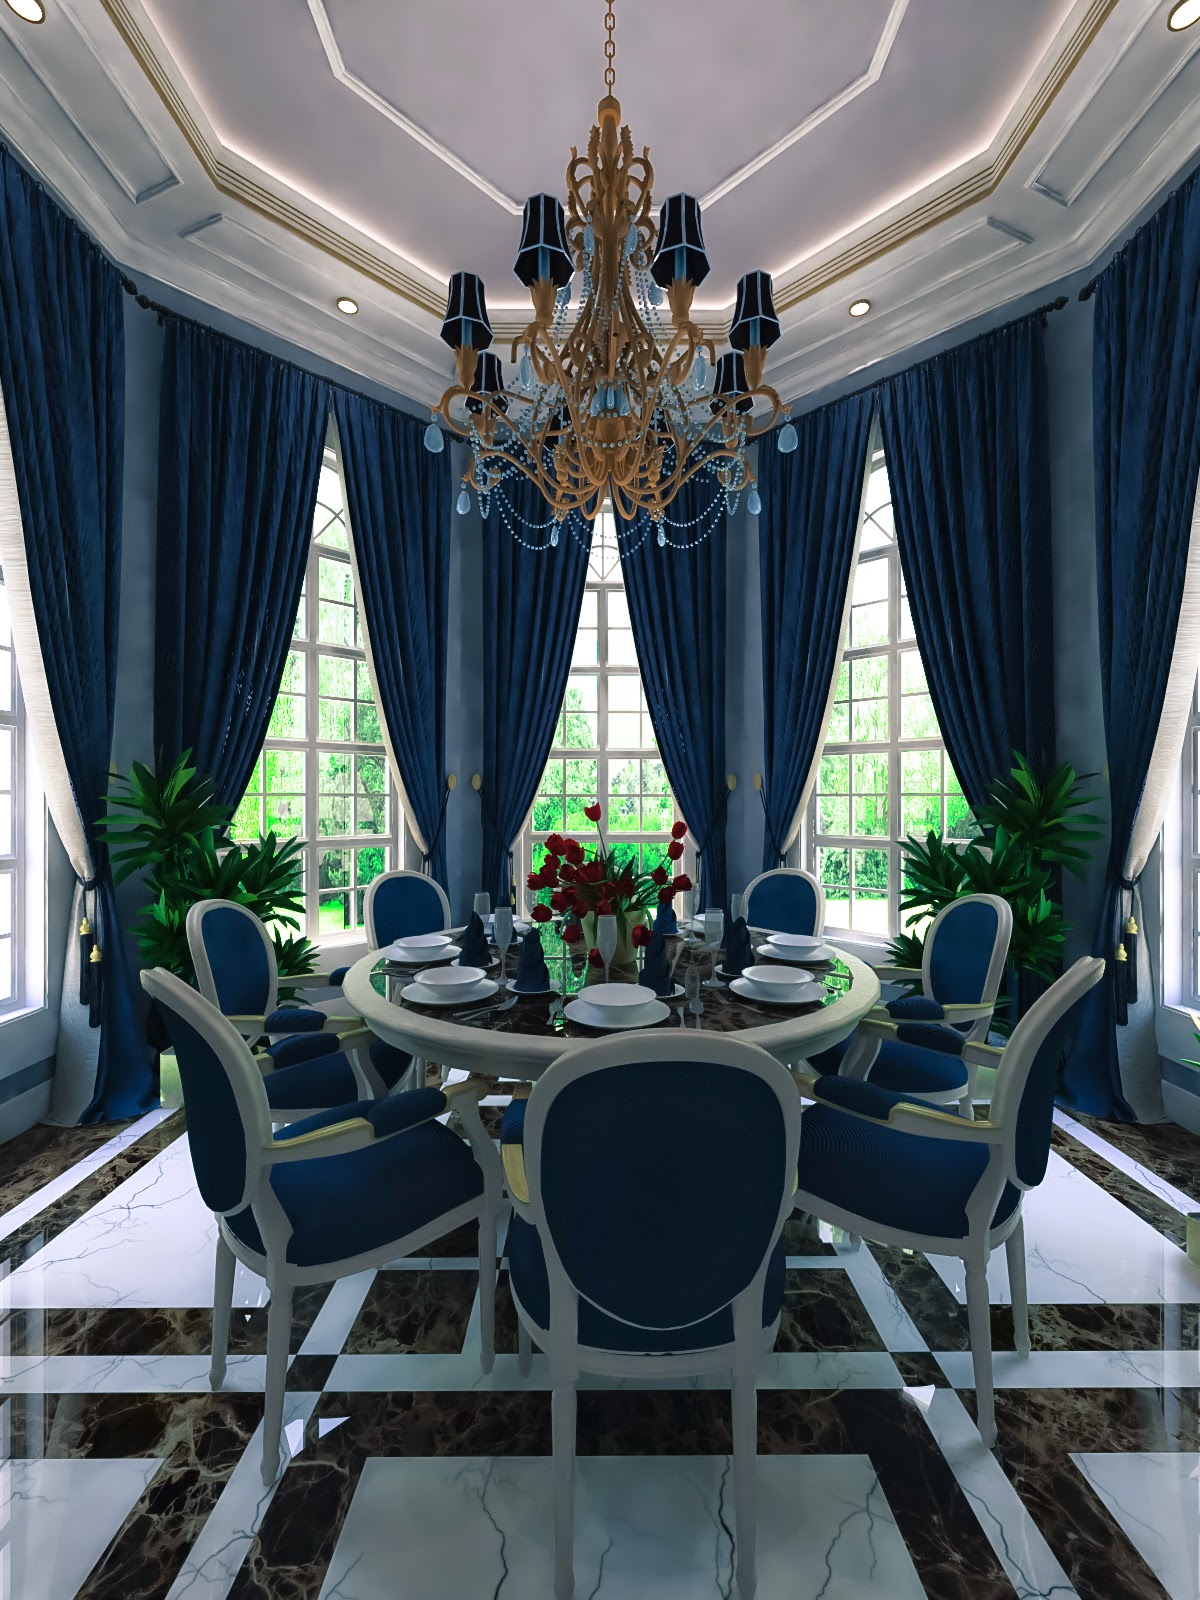 Royal Dining Room - Modern Classical Revised